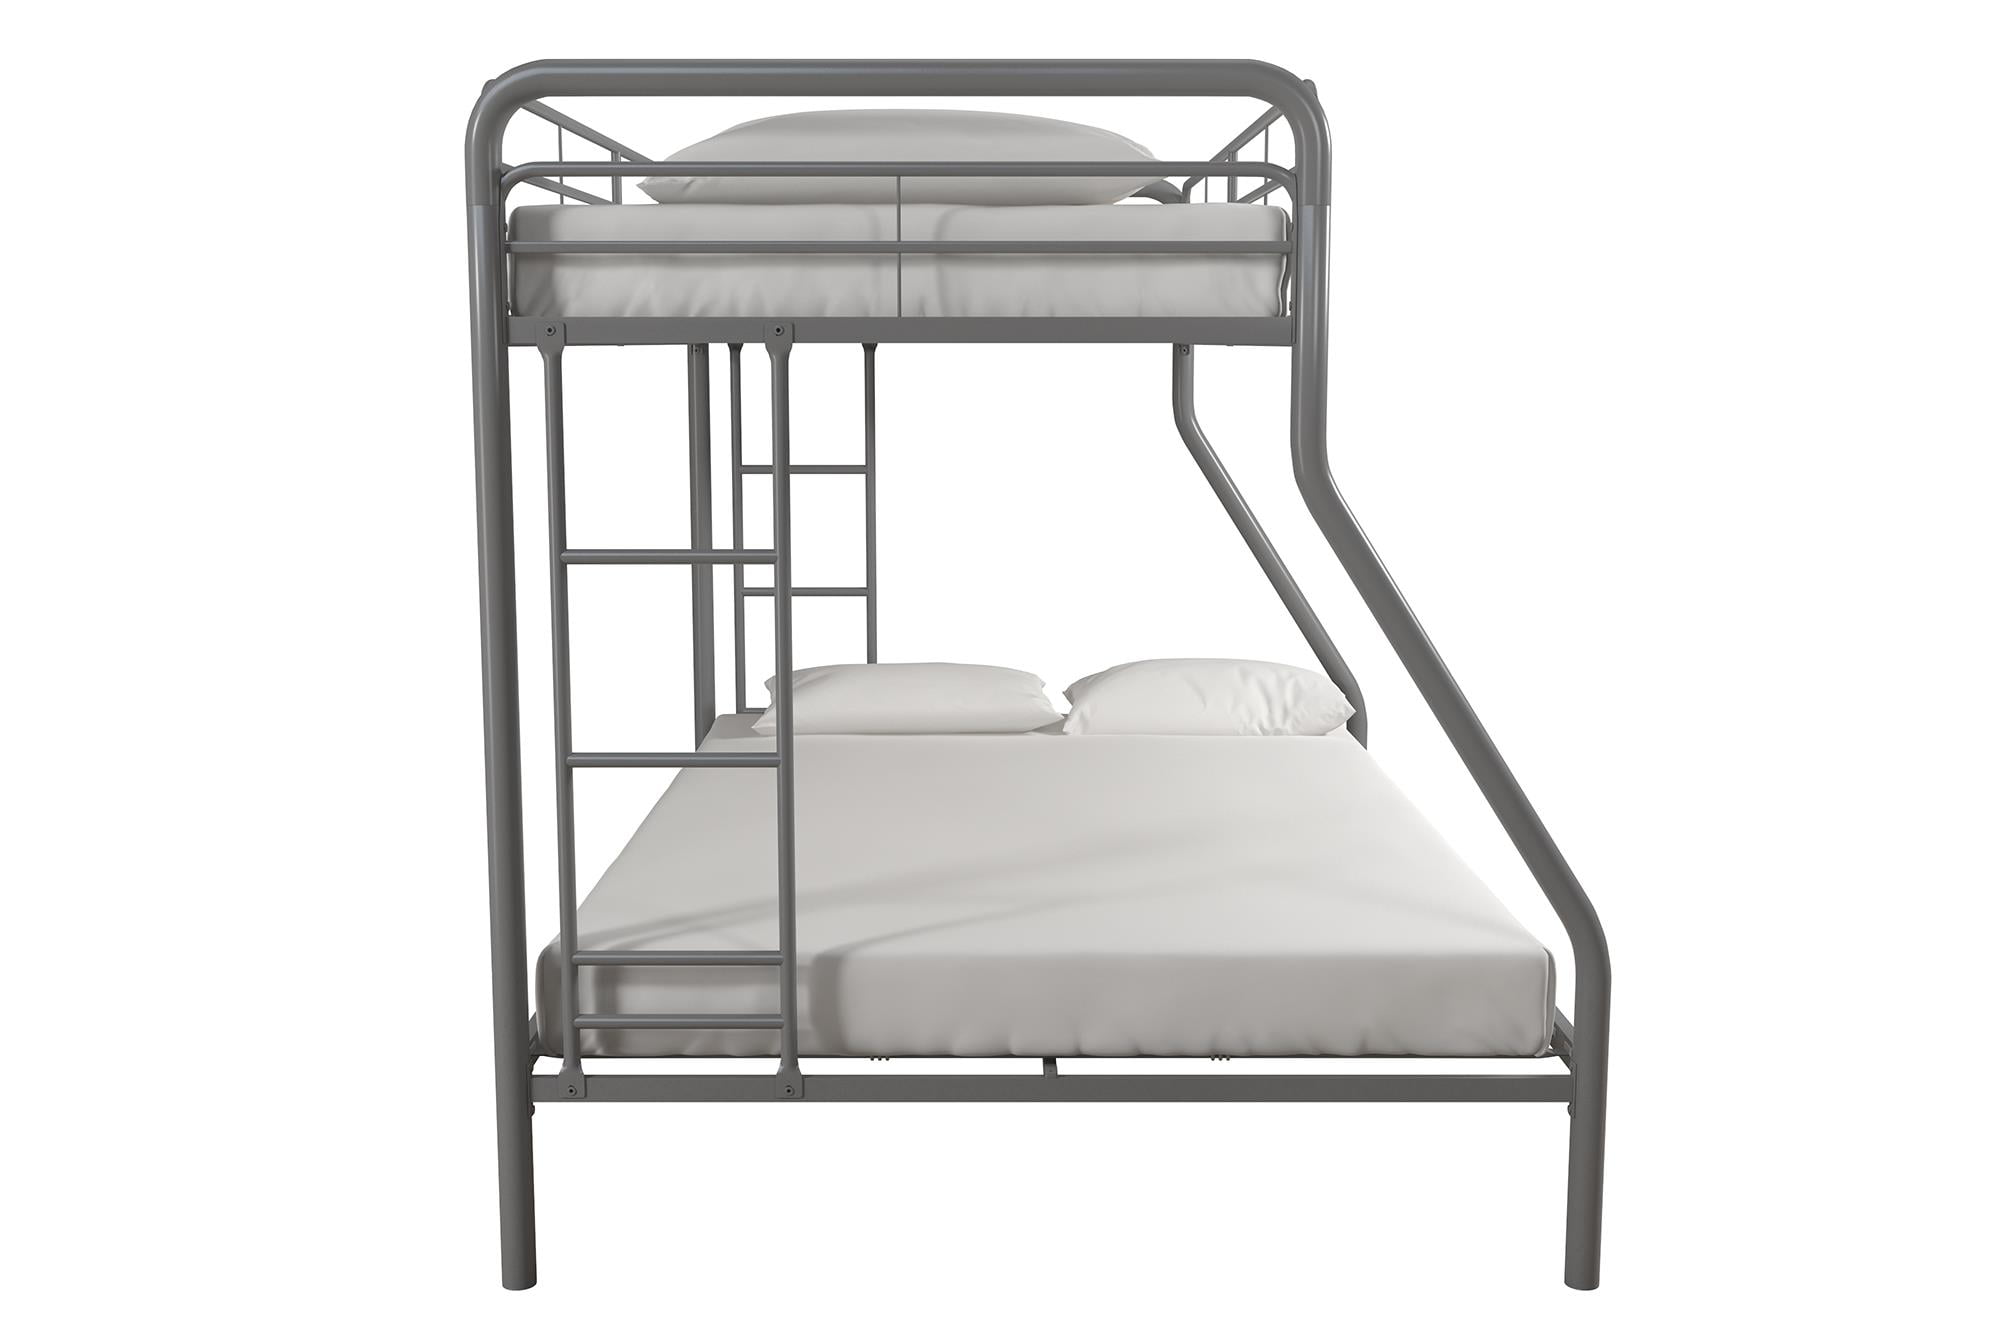 Dhp Twin Over Full Metal Bunk Bed Frame, Twin Over Metal Bunk Bed Assembly Instructions